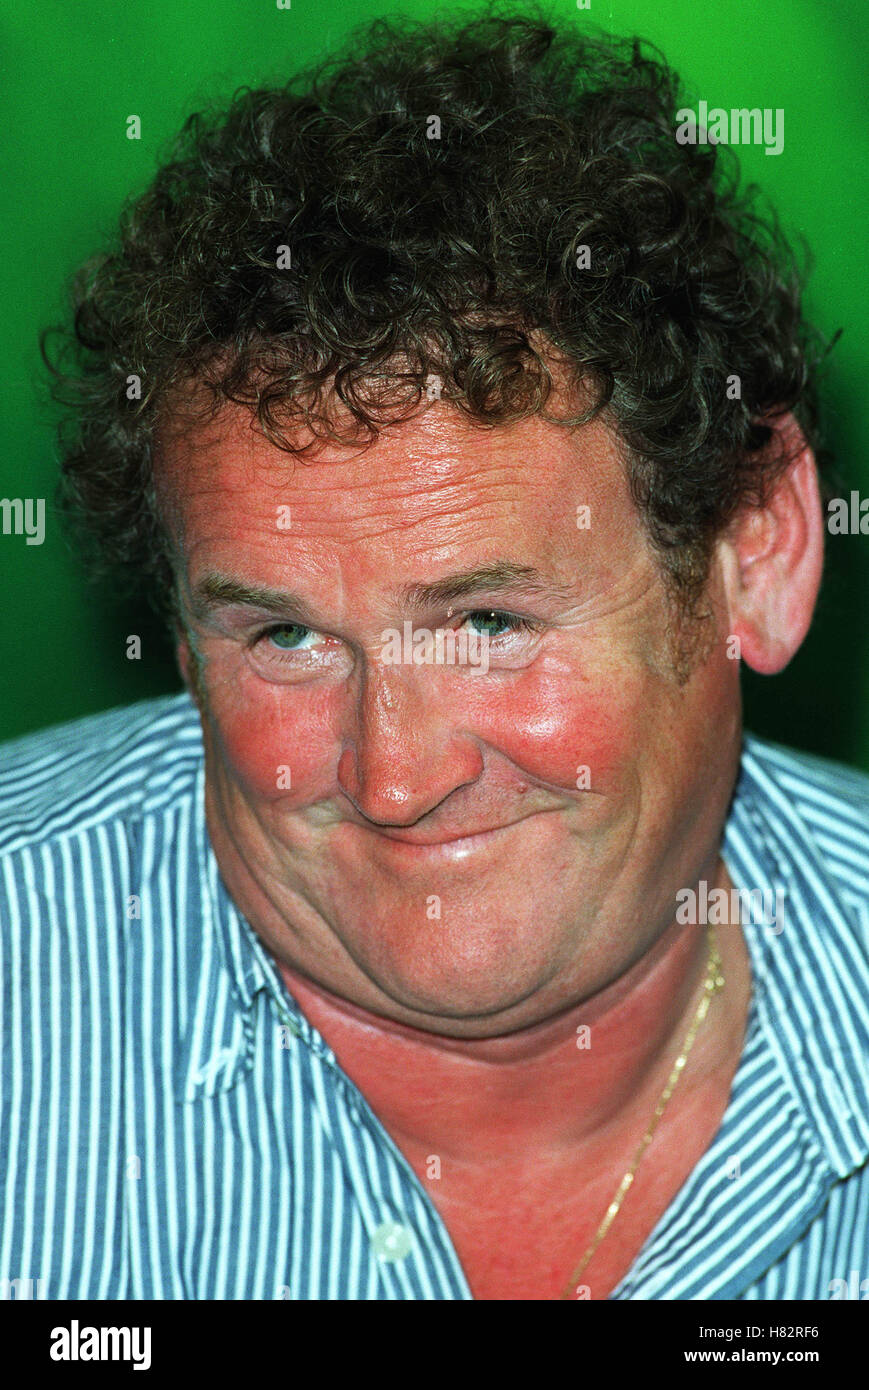 COLM MEANEY 'HOW HARRY BECAME A TREE' P-C VENICE FILM FESTIVAL 2001 ITALY 07 September 2001 Stock Photo